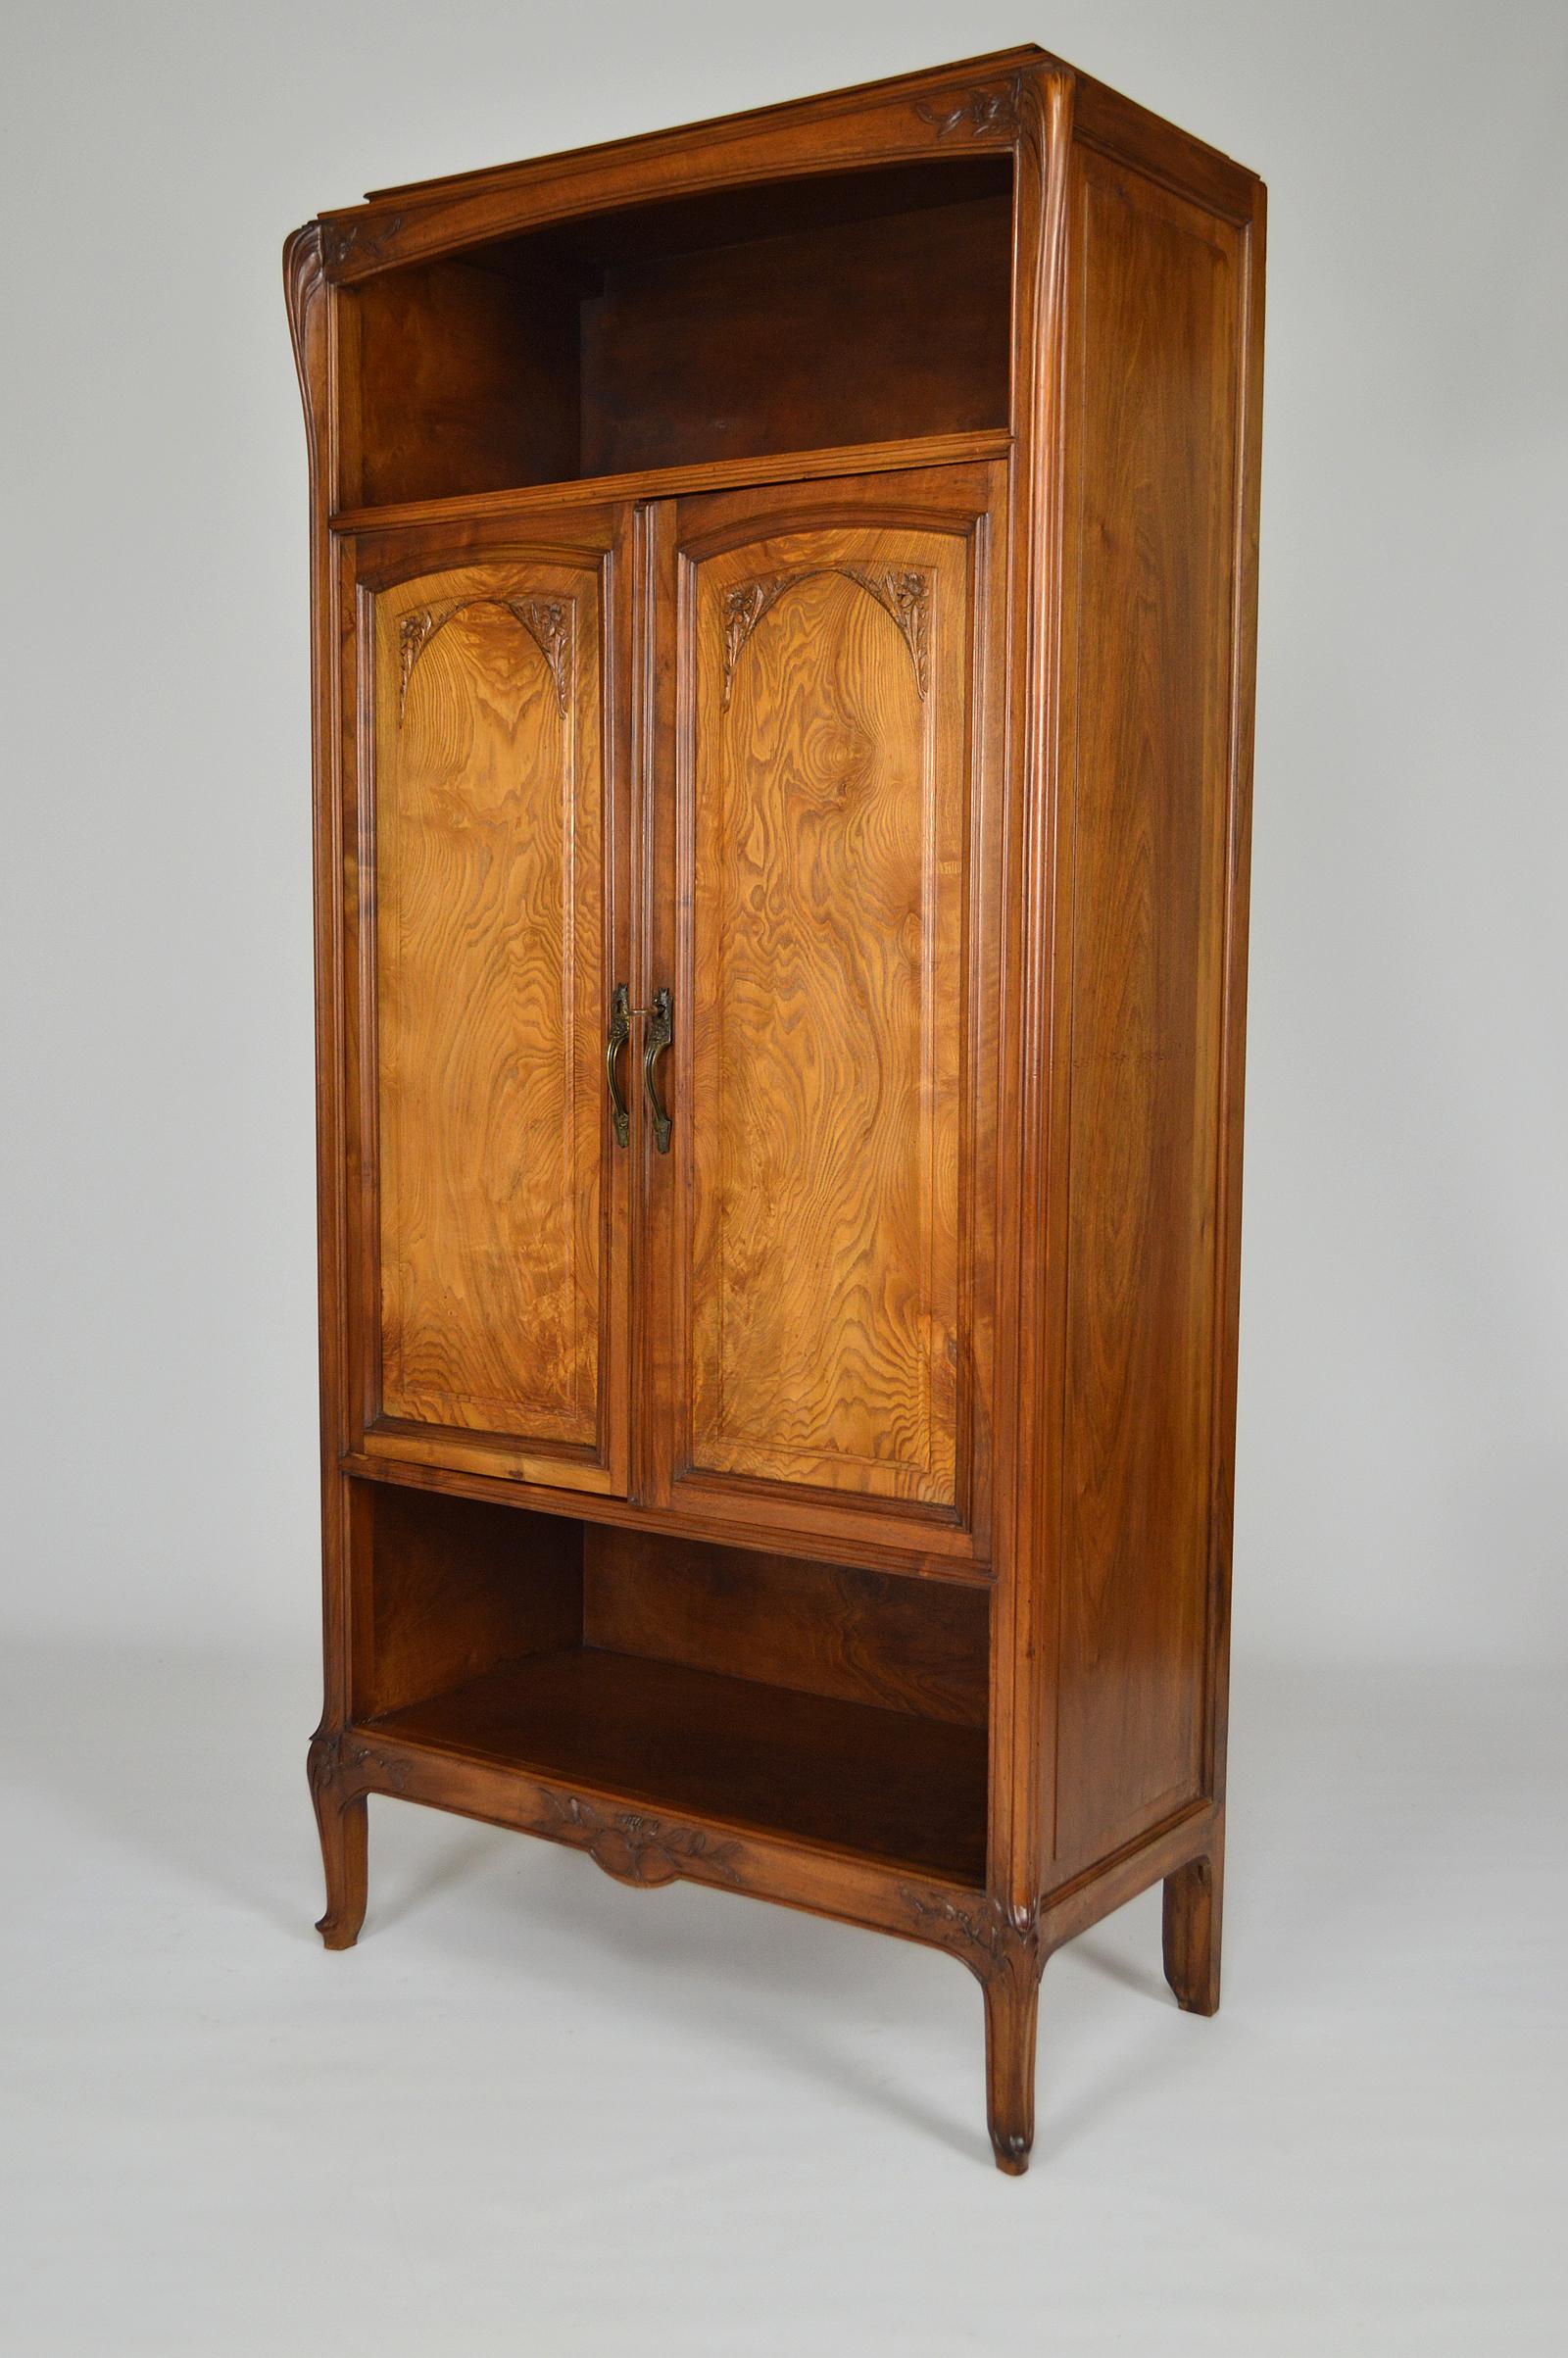 Beautiful bookcase / display cabinet / small wardrobe / showcase.

In carved walnut and carved elm on a floral theme (flowers).

Handles in bronze, very beautiful quality, on a floral theme (flowers).

Unsigned. For us it is certainly a